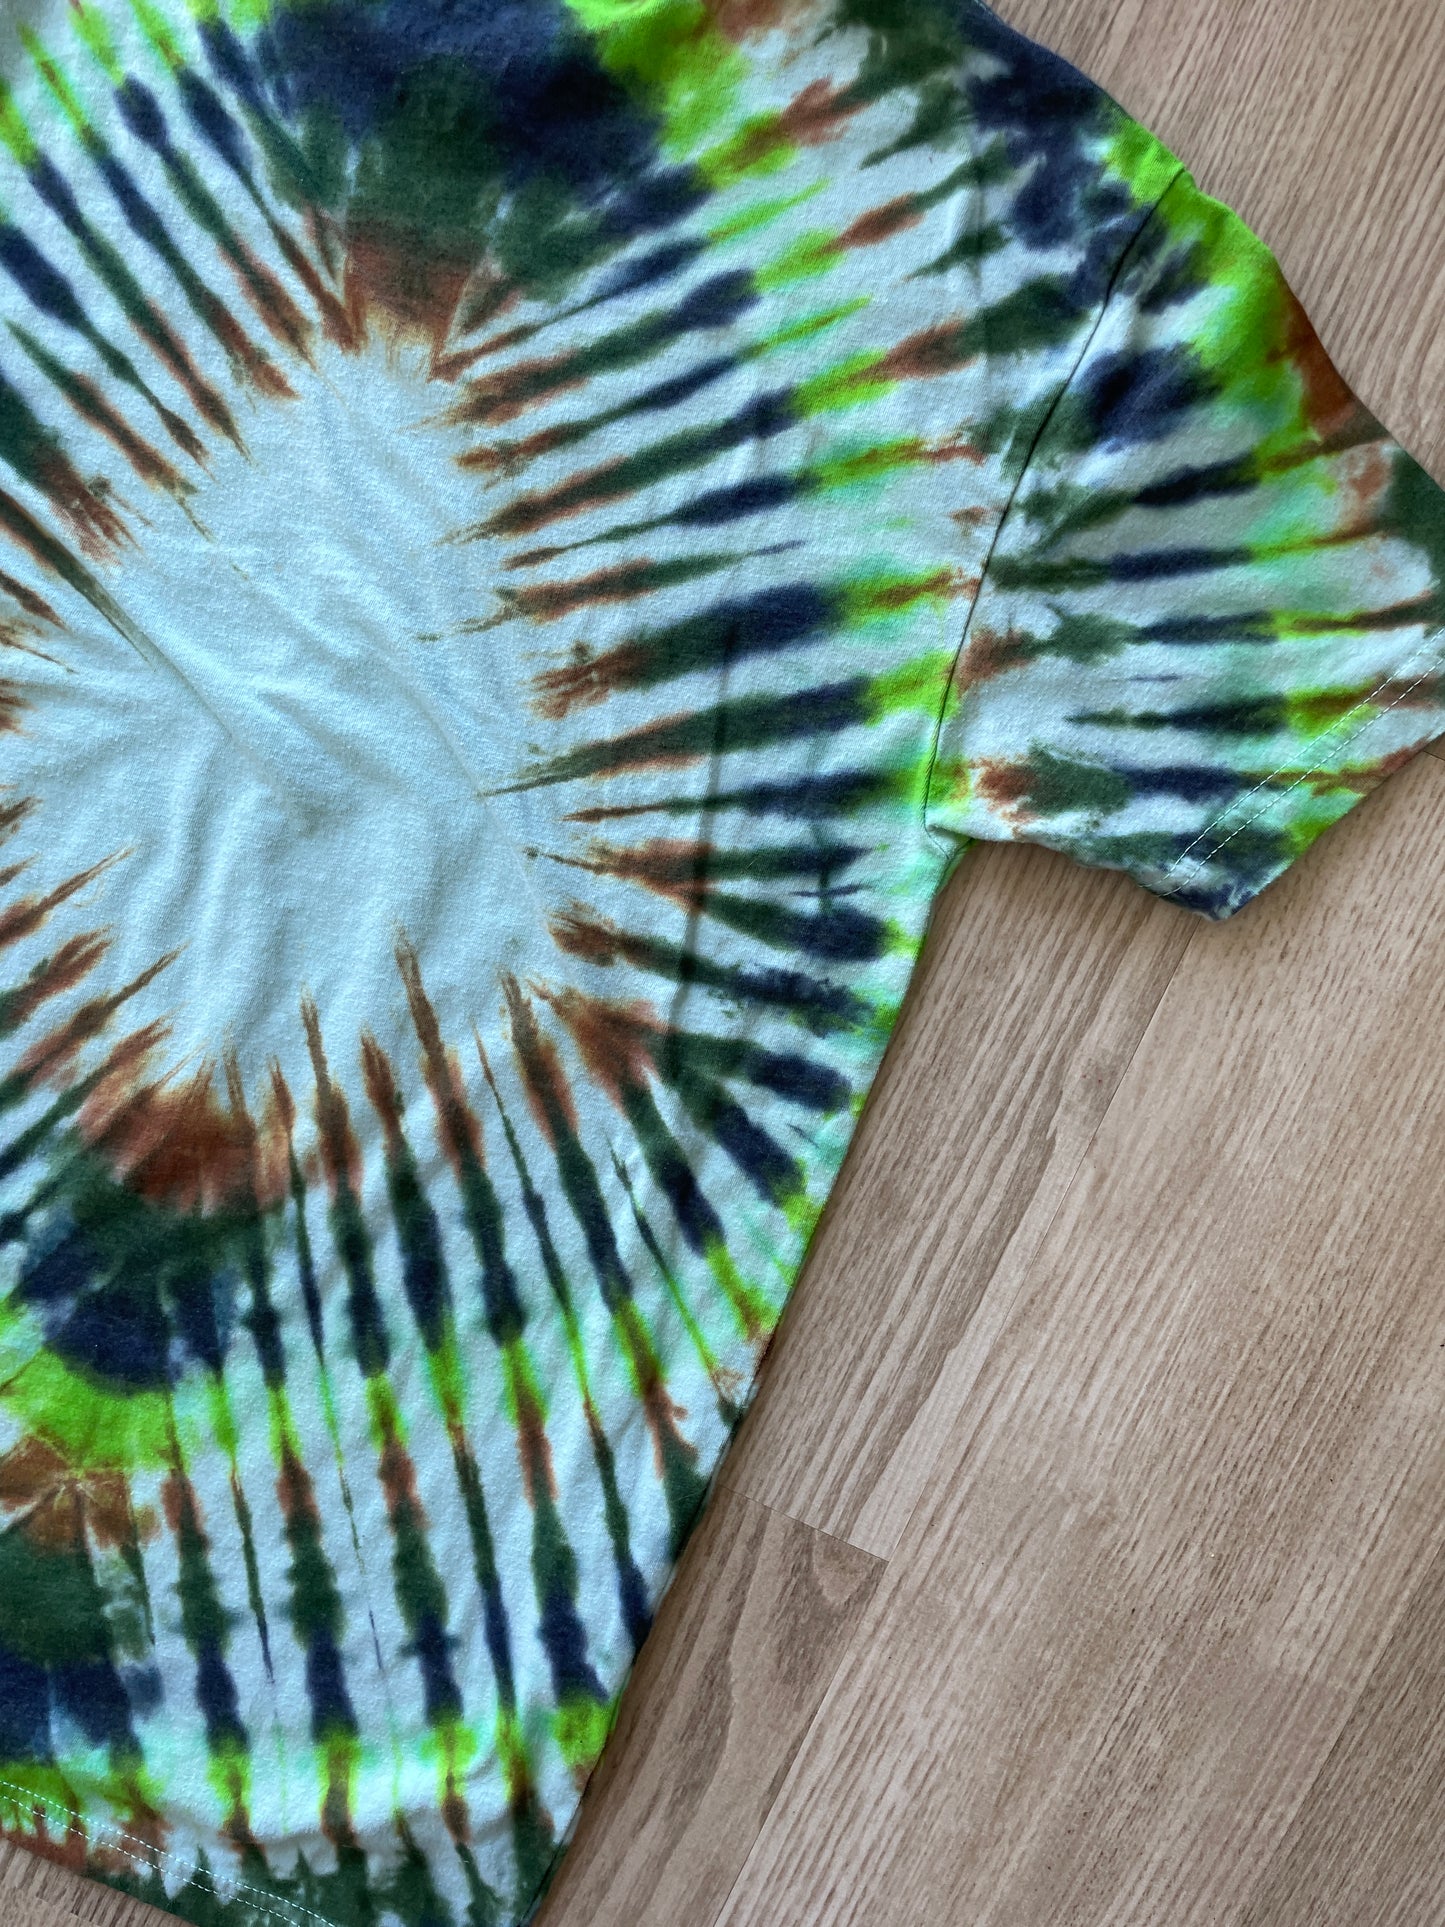 XS Men’s Wild Lucille Trigger Warning Handmade Tie Dye T-Shirt | One-Of-a-Kind Green and Brown Pleated Short Sleeve